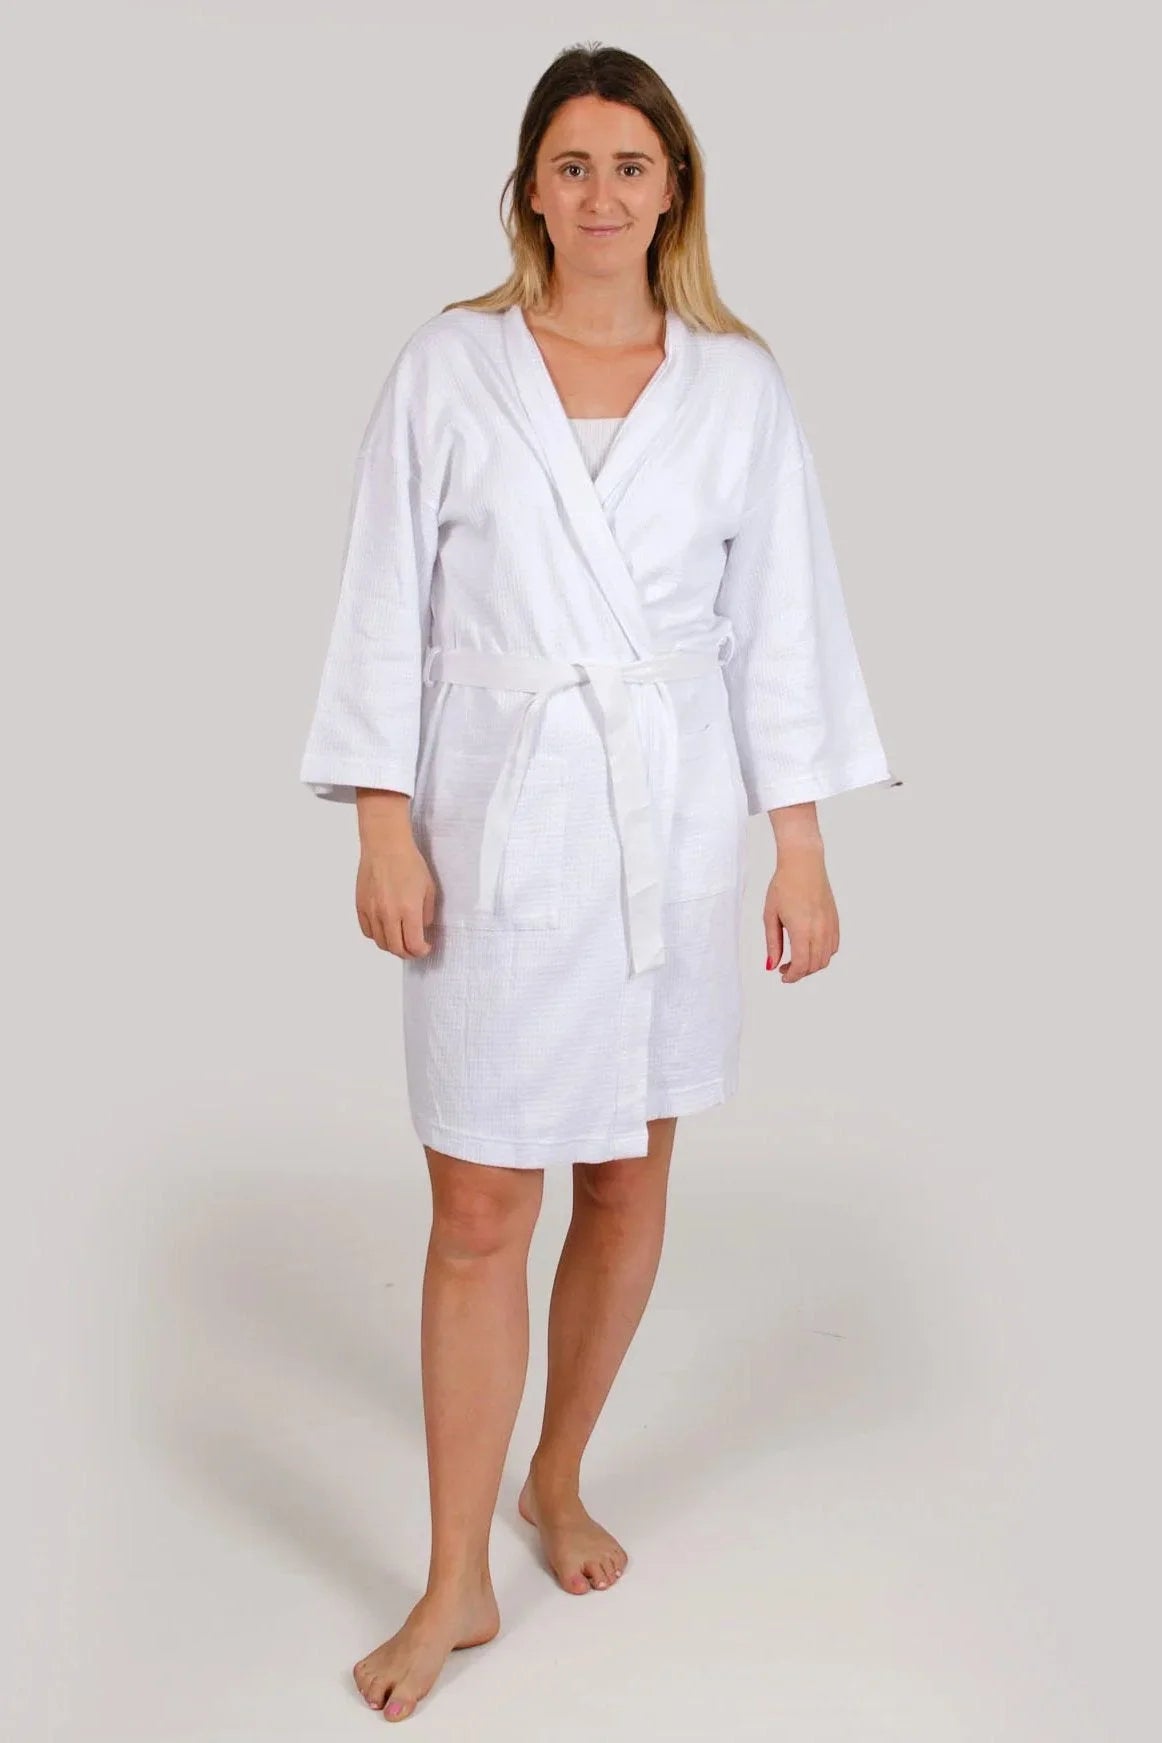 M&S Cotton Waffle Summer Dressing Gown White / XL